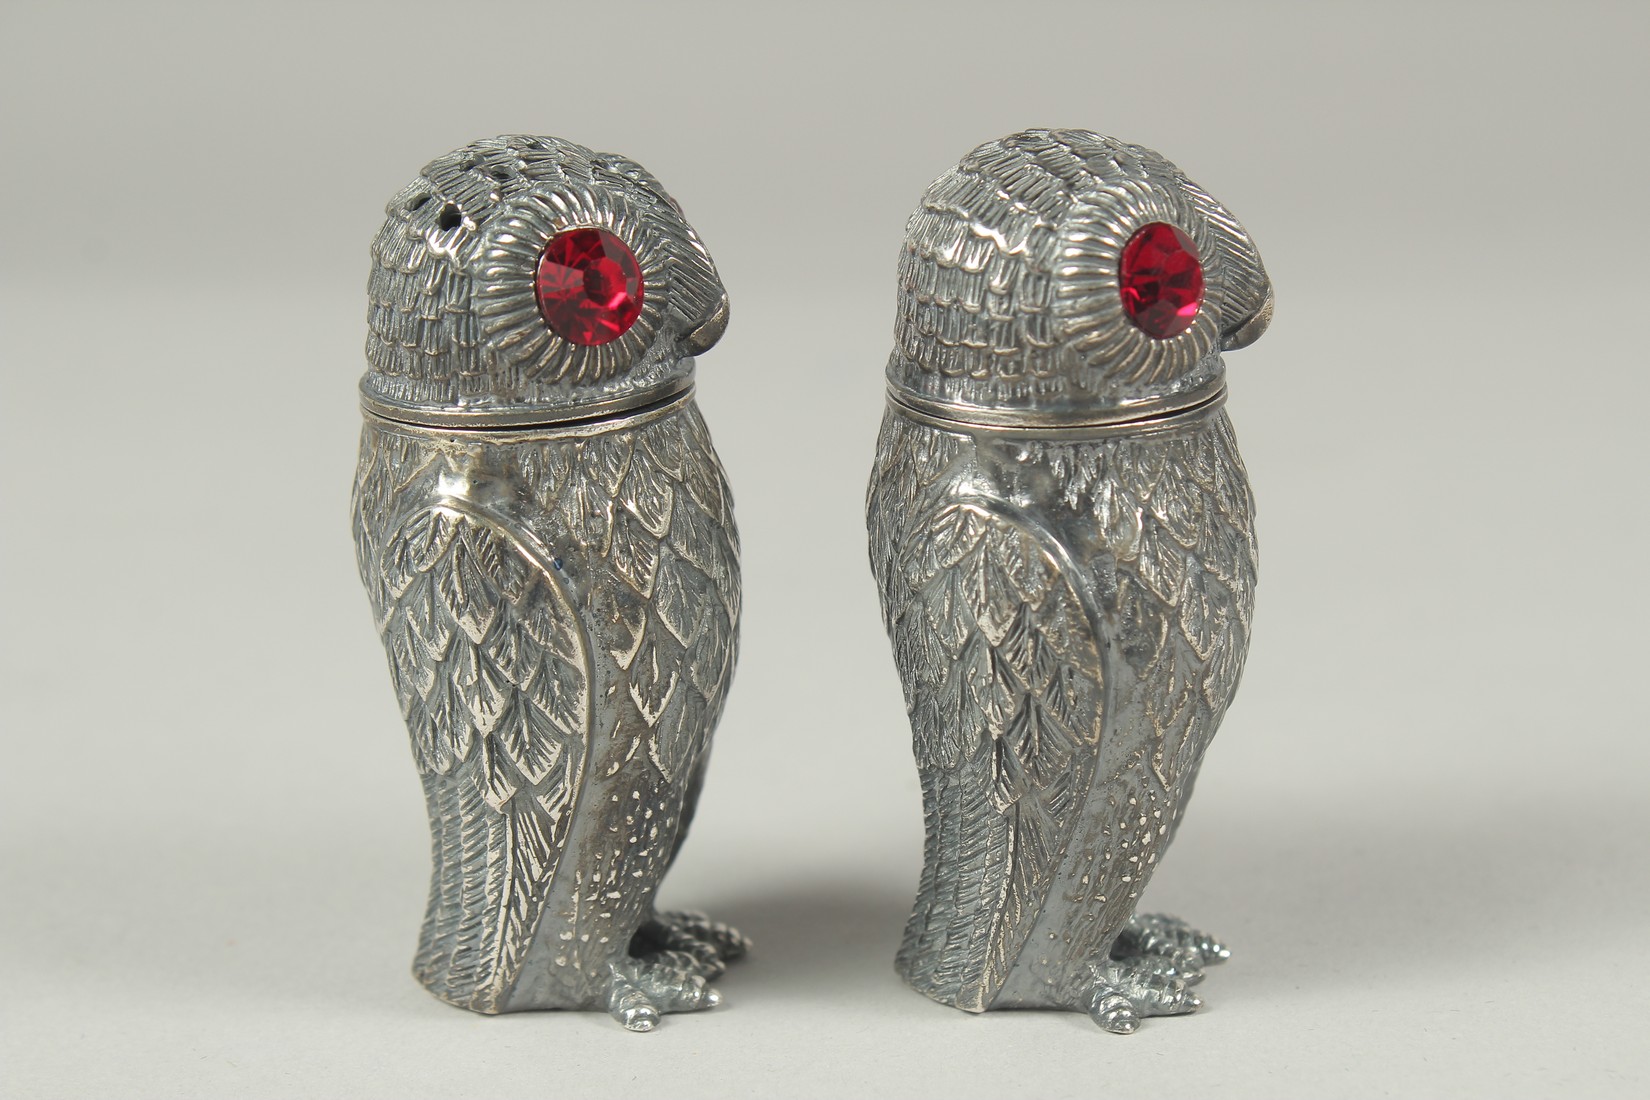 A good pair of owl salt and peppers, 6.5cm. - Image 4 of 5